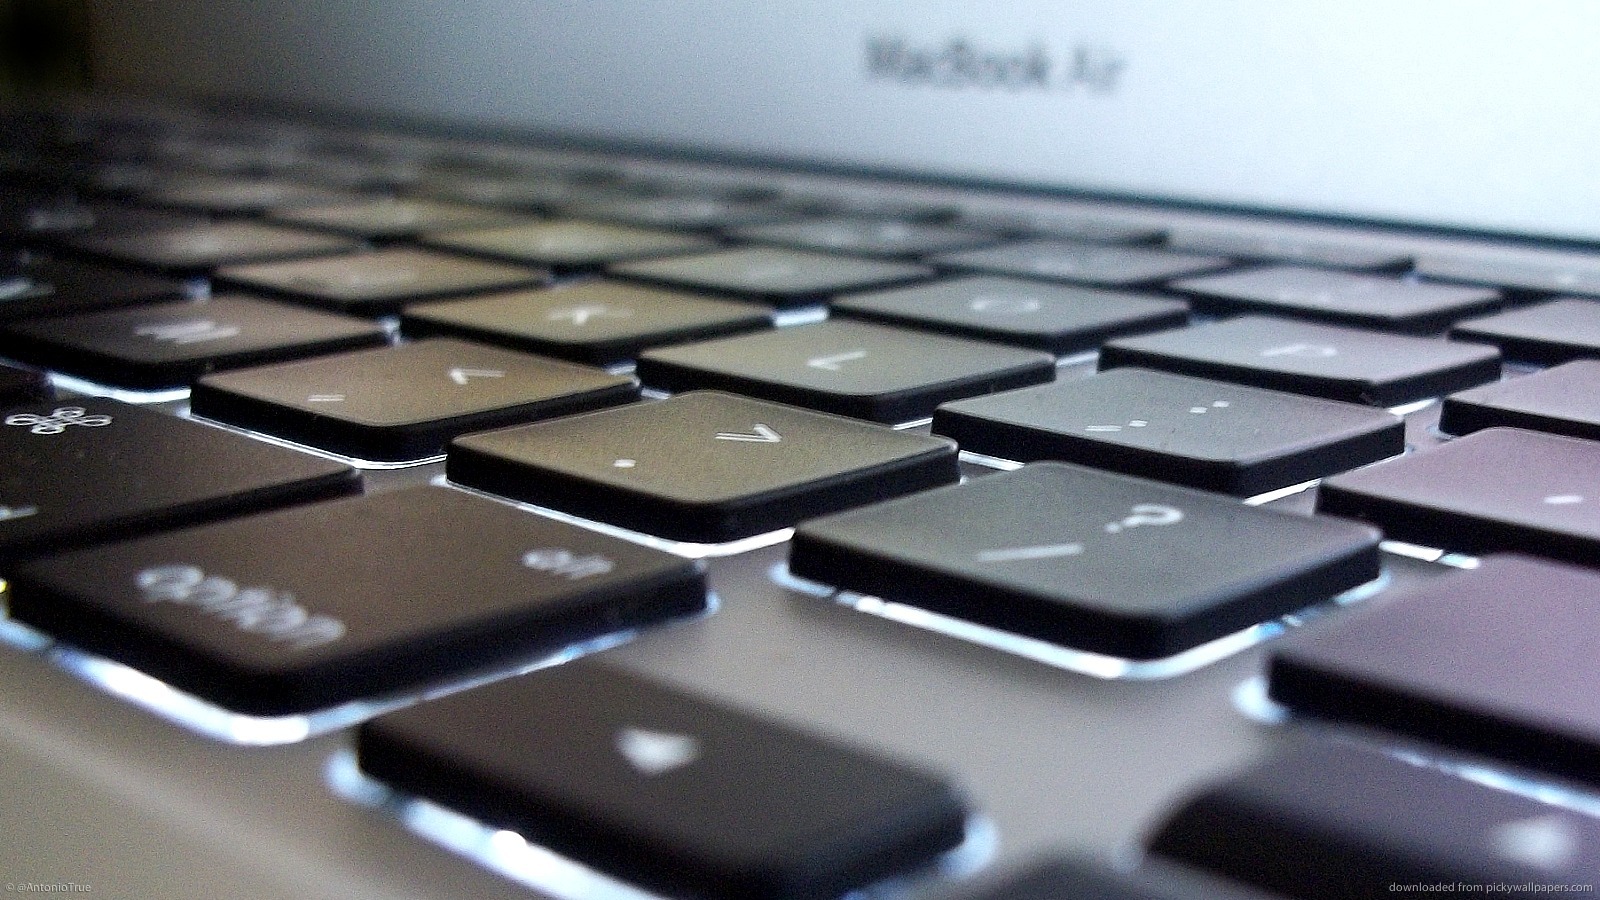 Free download Macbook Air Keyboard for 1600x900 [1600x900] for your